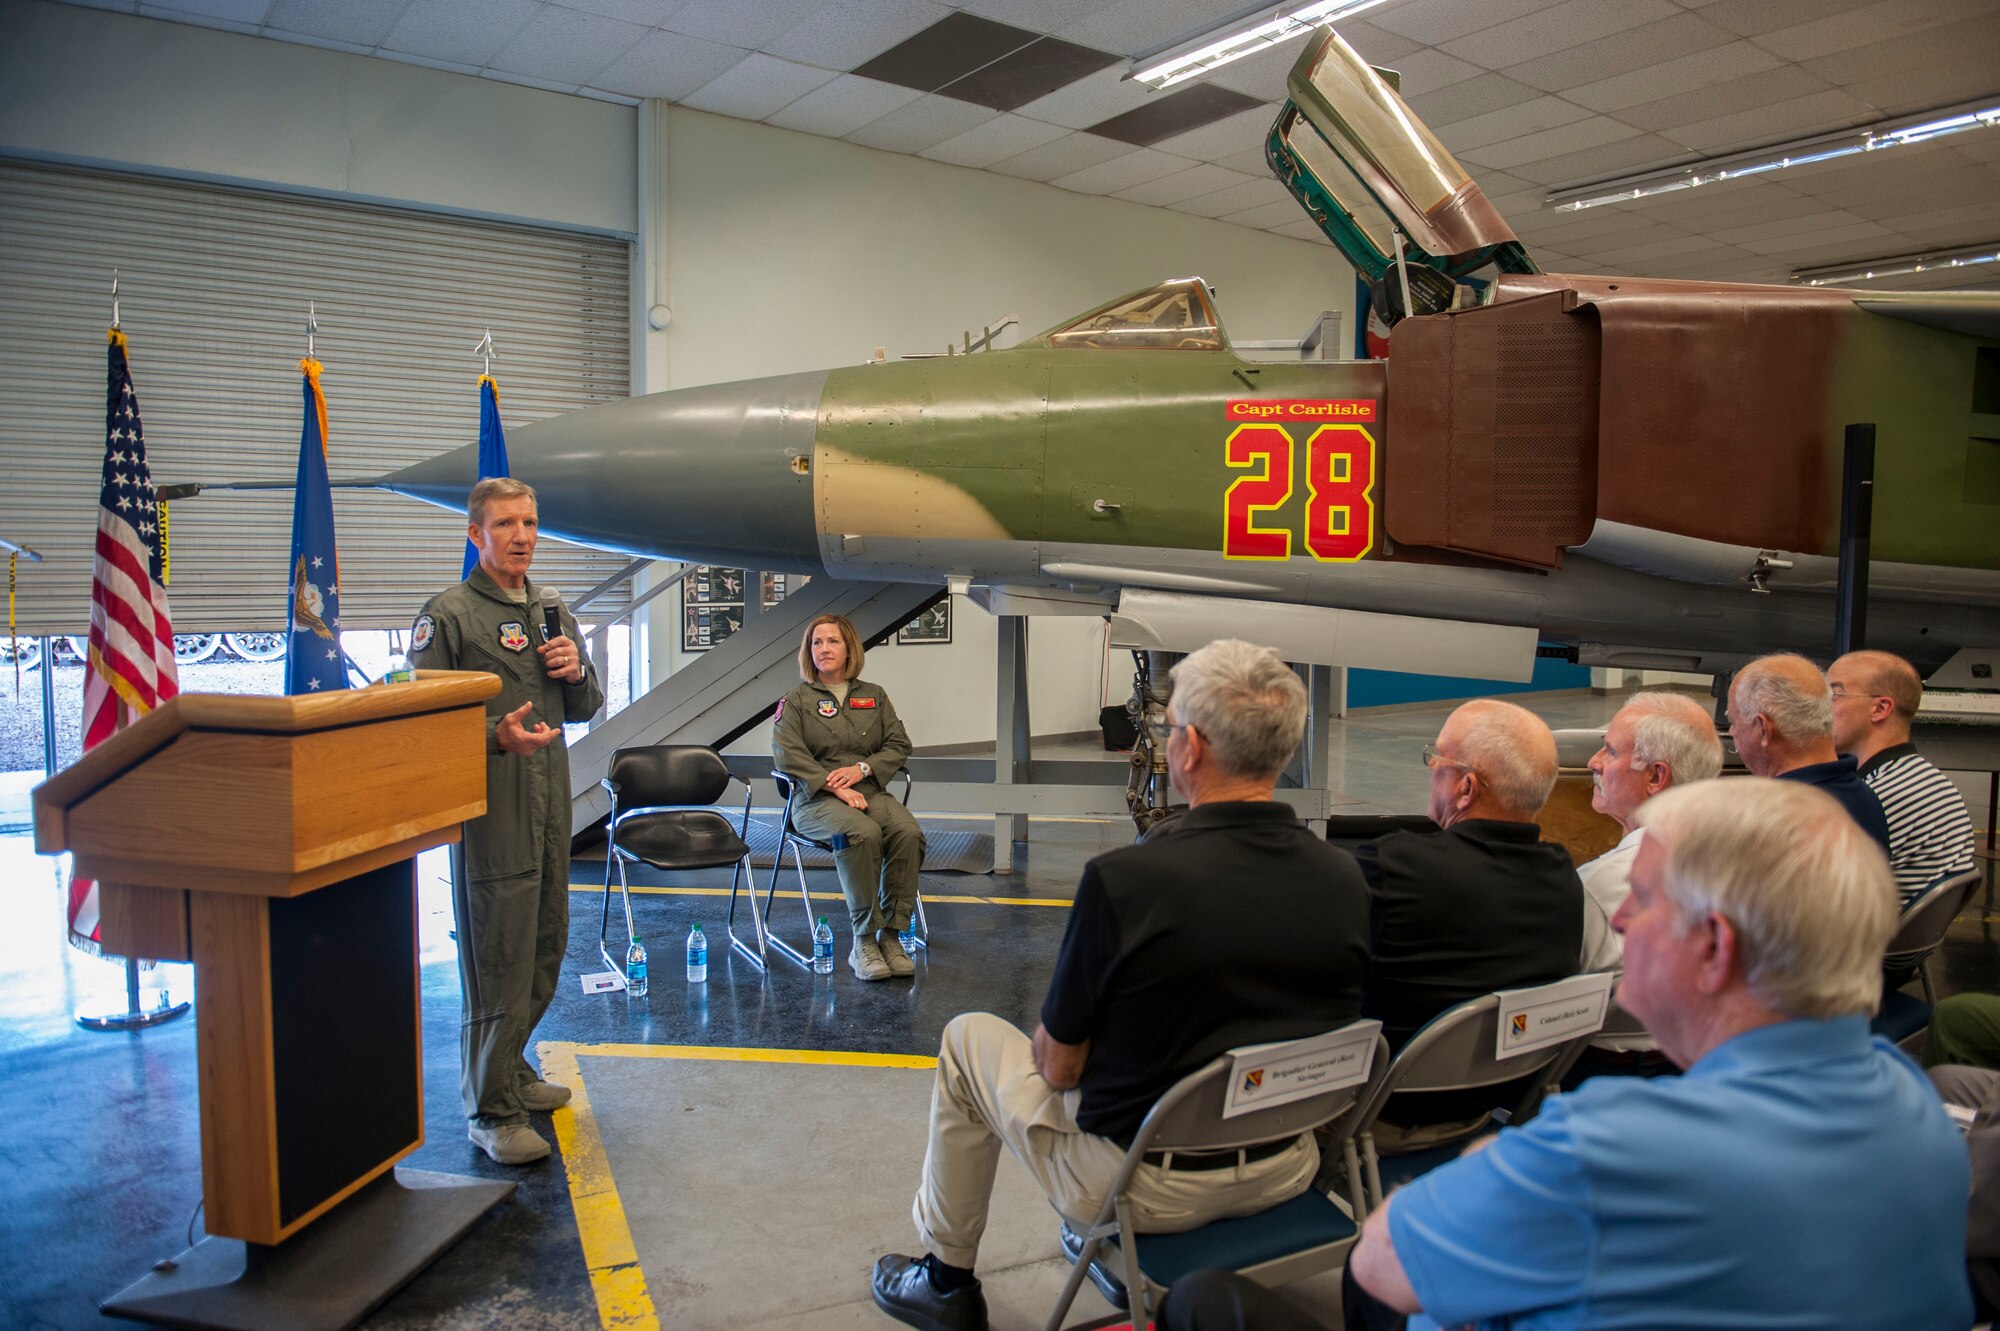 Gen. “Hawk” Carlisle, commander of Air Combat Command gives a speech during a dedication ceremony at the Threat Training Facility on Nellis Air Force Base, Nev., Oct. 17. During the ceremony, a MiG-23 was dedicated to honor his role in the CONSTANT PEG program. The mission of CONSTANT PEG was to train U.S. Air Force, U.S. Navy and U.S. Marine Corps combat fighter aircrews on the best ways to fight and win when encountering MiG built aircraft in aerial combat. Carlisle was the chief of weapons and tactics as well as flight commander for the 4477th Test and Evaluation Squadron from 1986 to 1988.